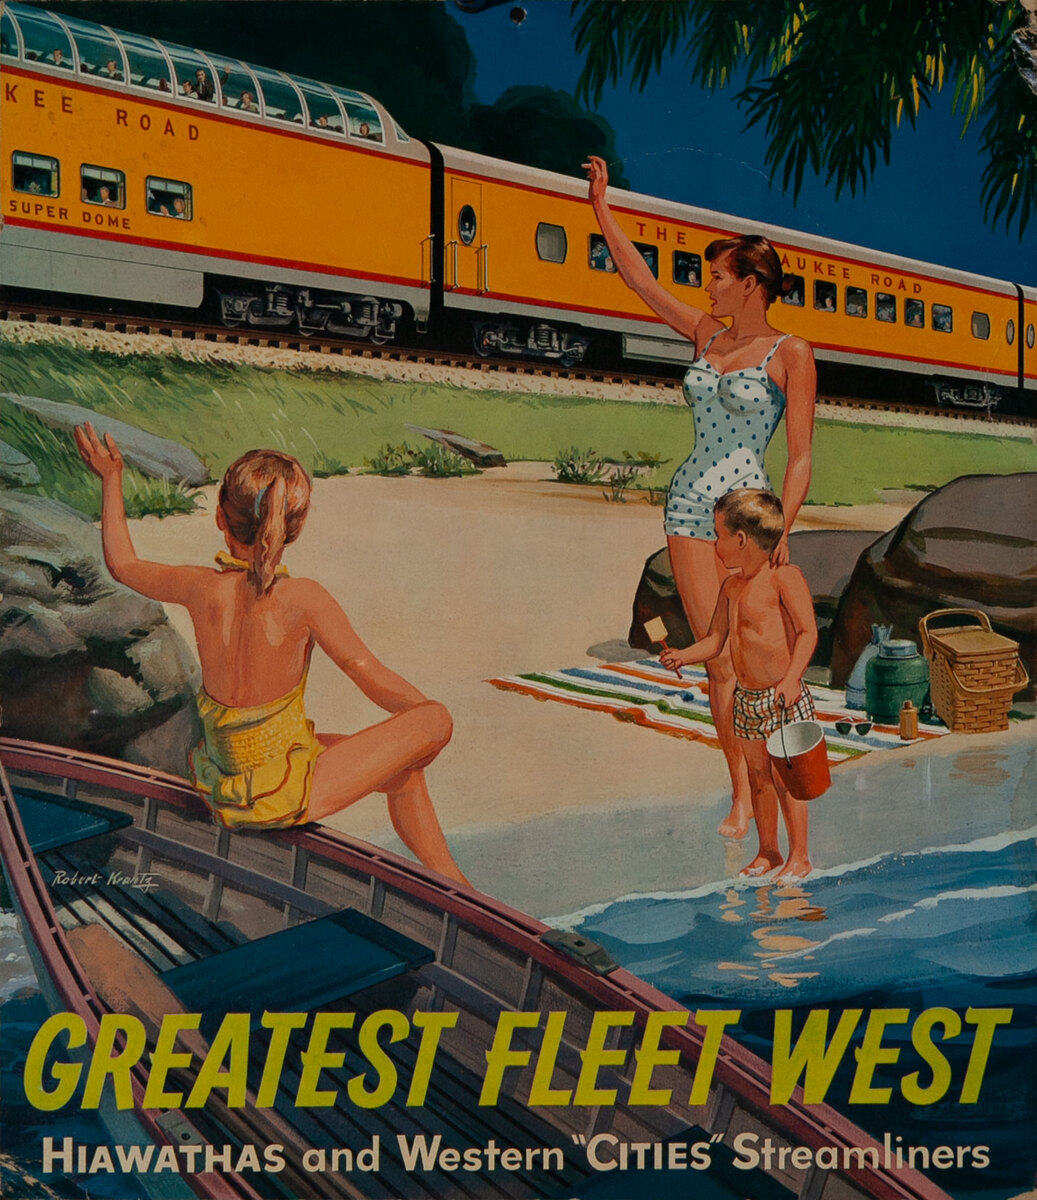 The Milwaukee Railroad Greatest Fleet West Hiawathas and Wester “Chief” Streamliners